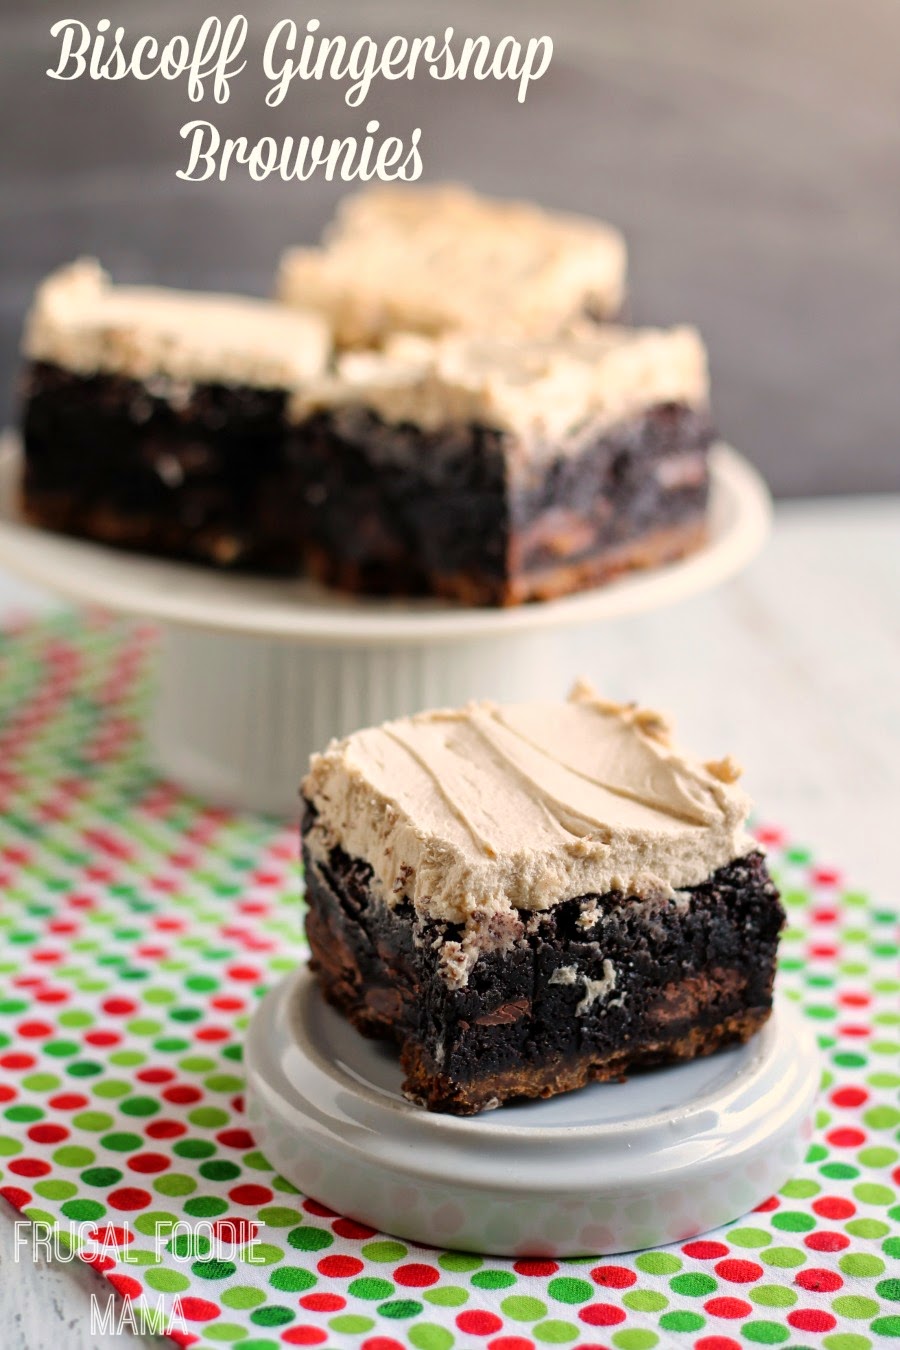 Biscoff Gingersnap Brownies- fudgy brownies with a chewy gingersnap crust are frosted with a creamy Biscoff buttercream